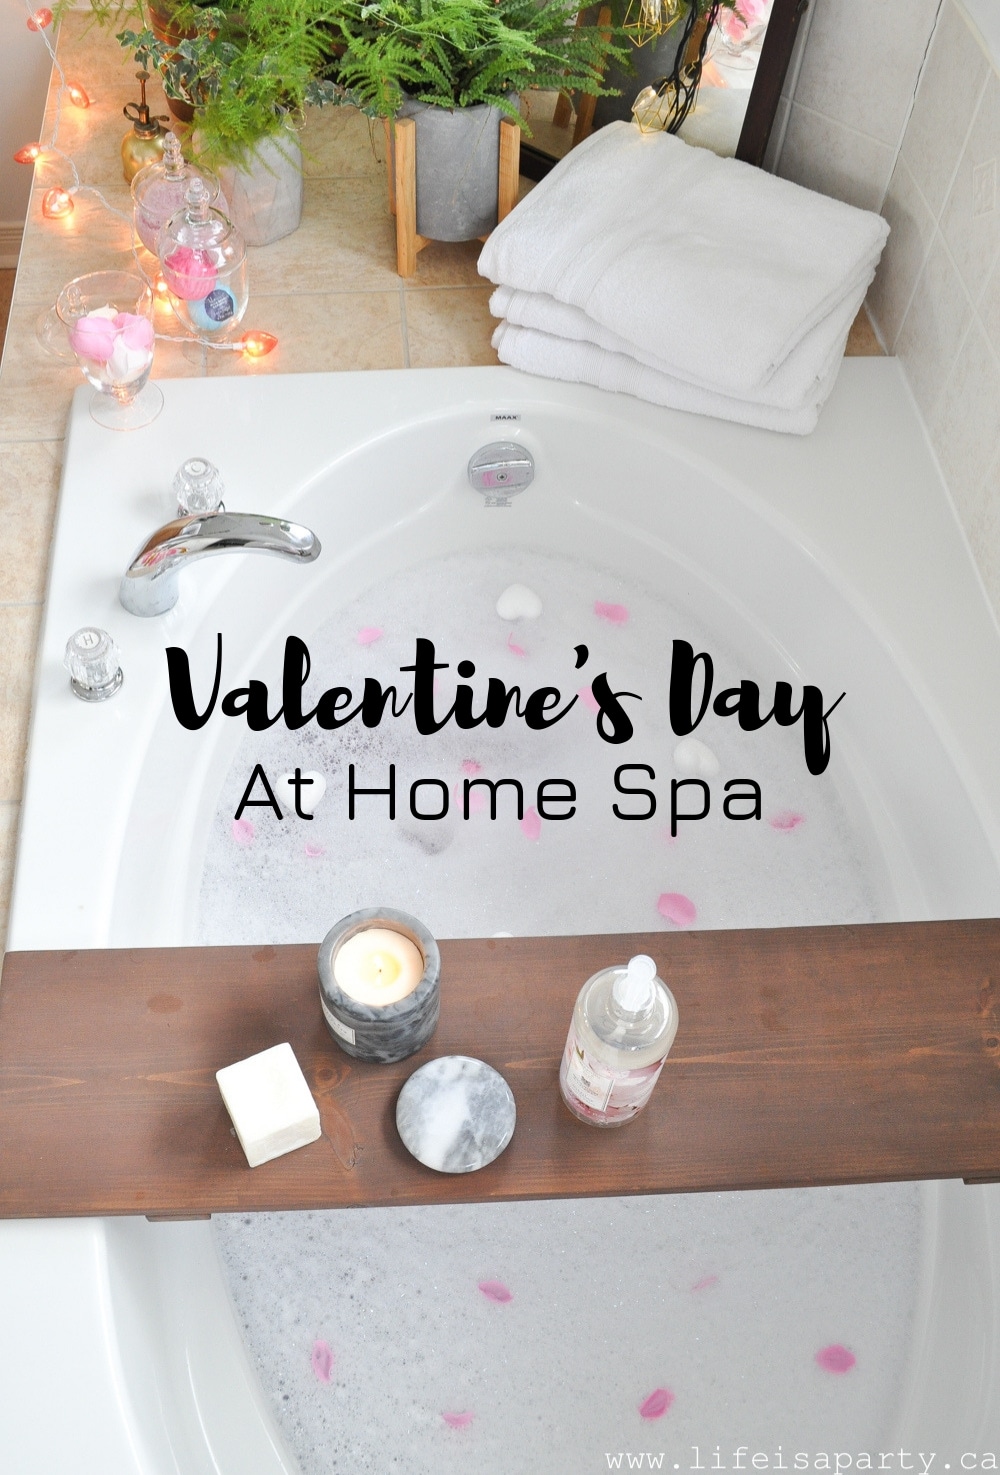 Valentine's Day At Home Spa: surprise your tween or teen daughters with face masks, manicures, fancy refreshments, candles, and a bubble bath.